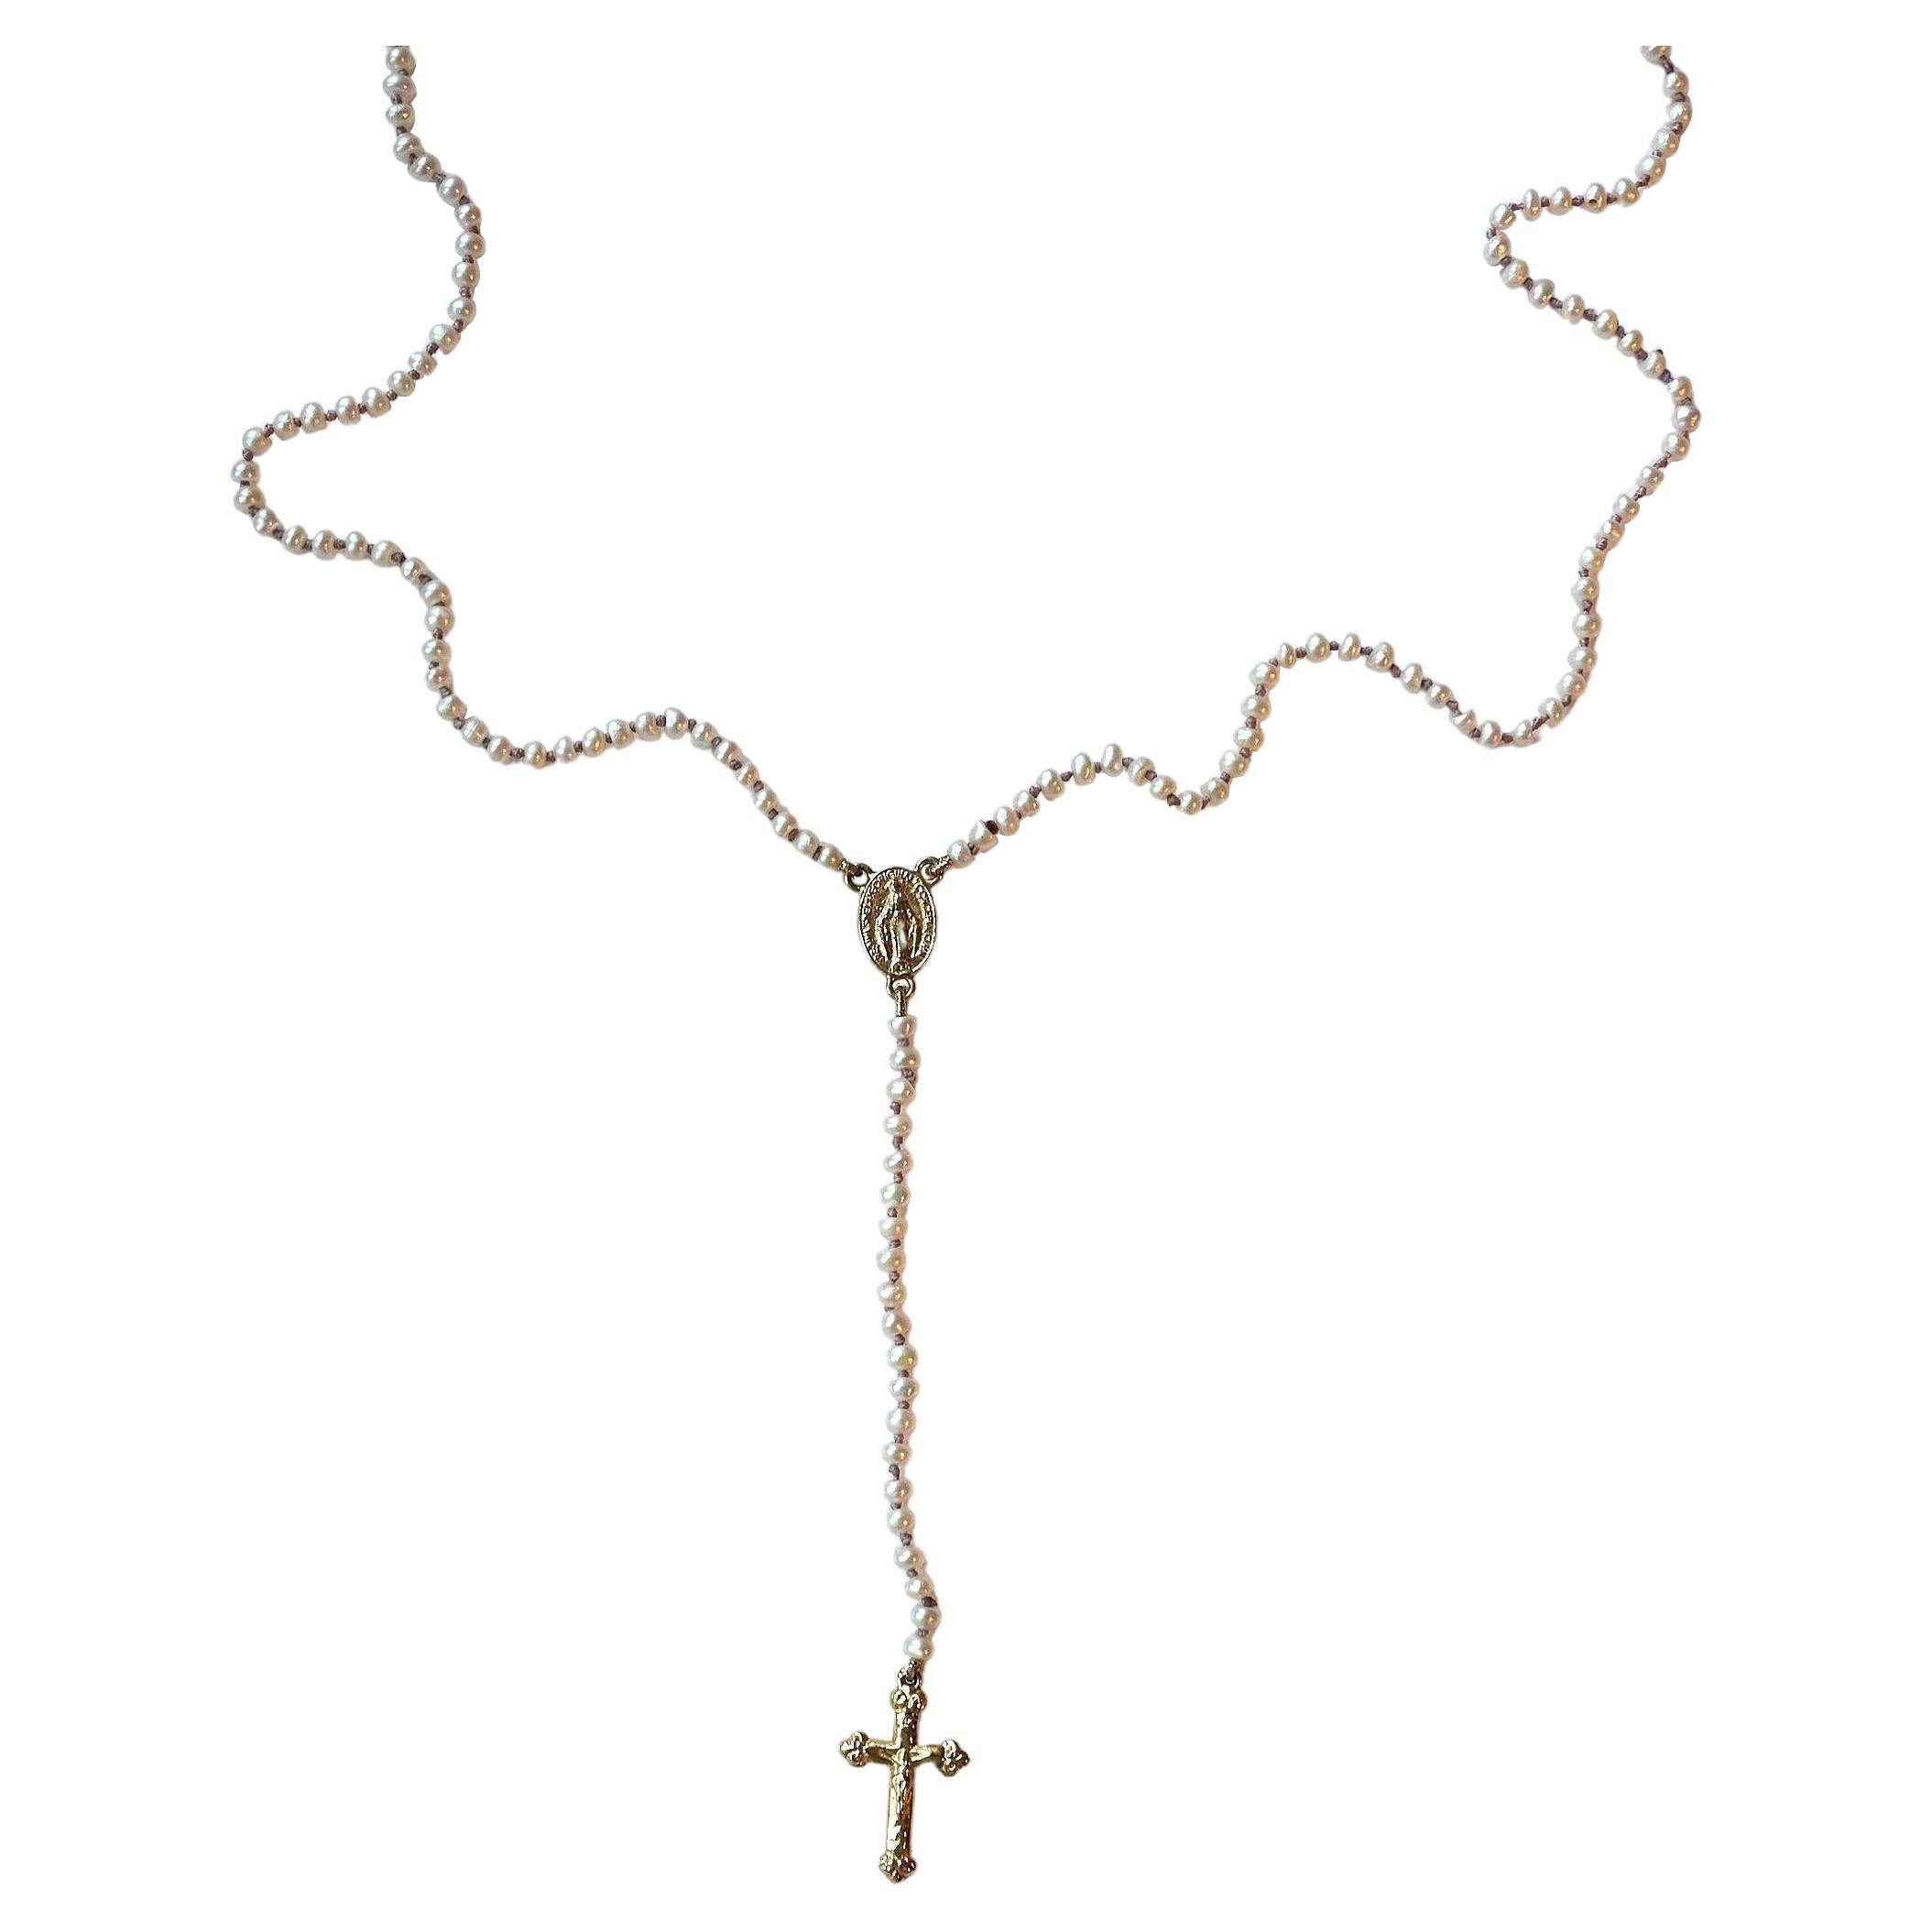 Rosario White Pearl Crucifix Cross Virgin Mary Gold Spiritual Religious Necklace For Sale